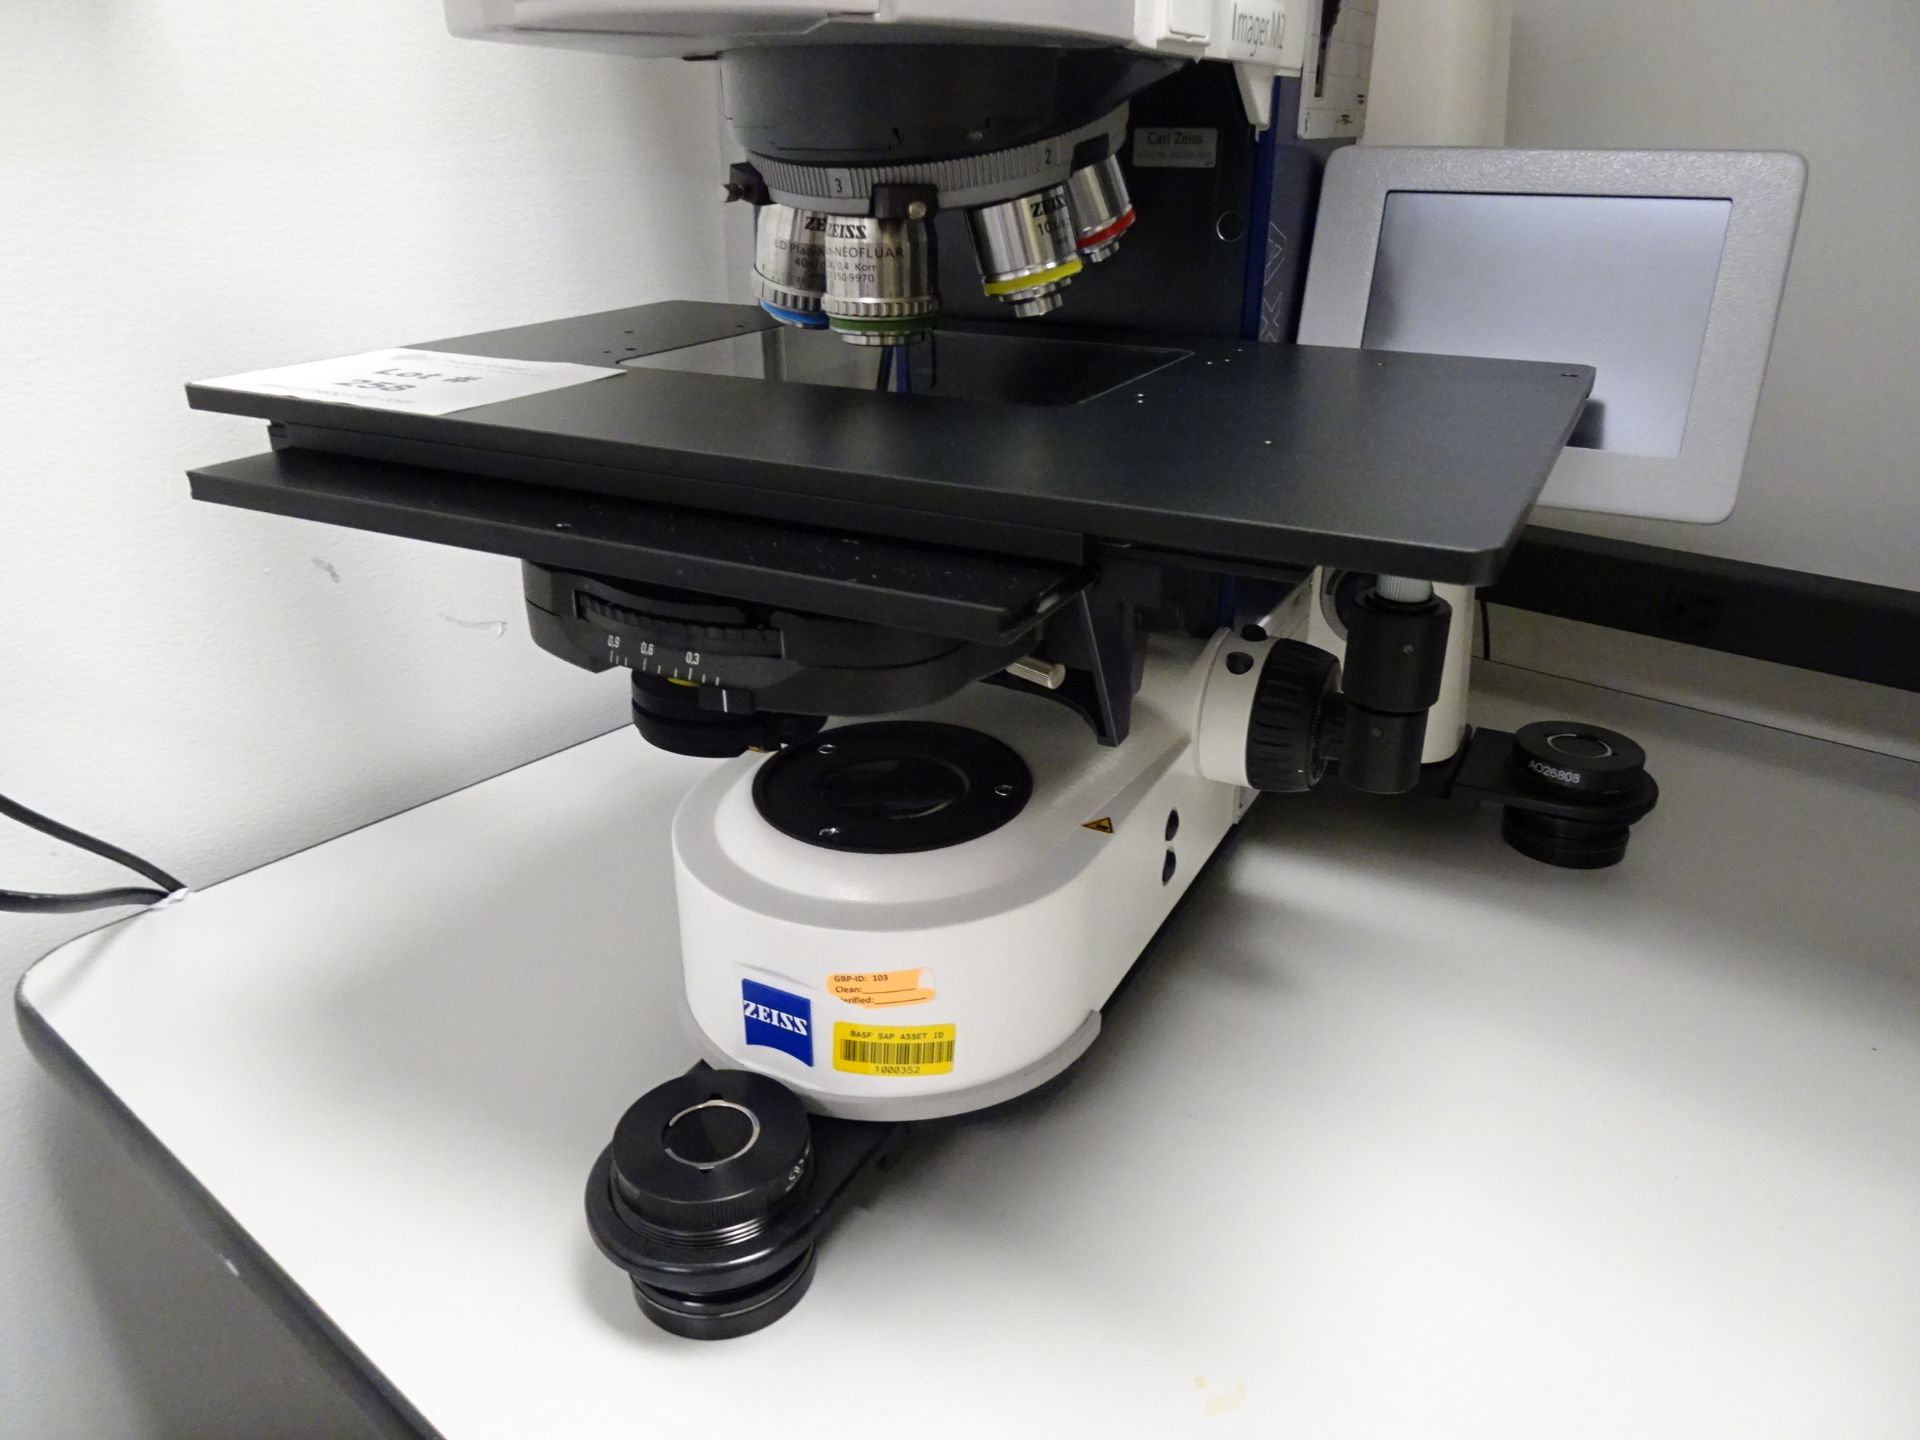 Zeiss Axio Imager.M2 Microscope With AxioCam MRM Camers With 60N-C 1" Camera Adapter, (2) 1PL 10x/23 - Image 12 of 22